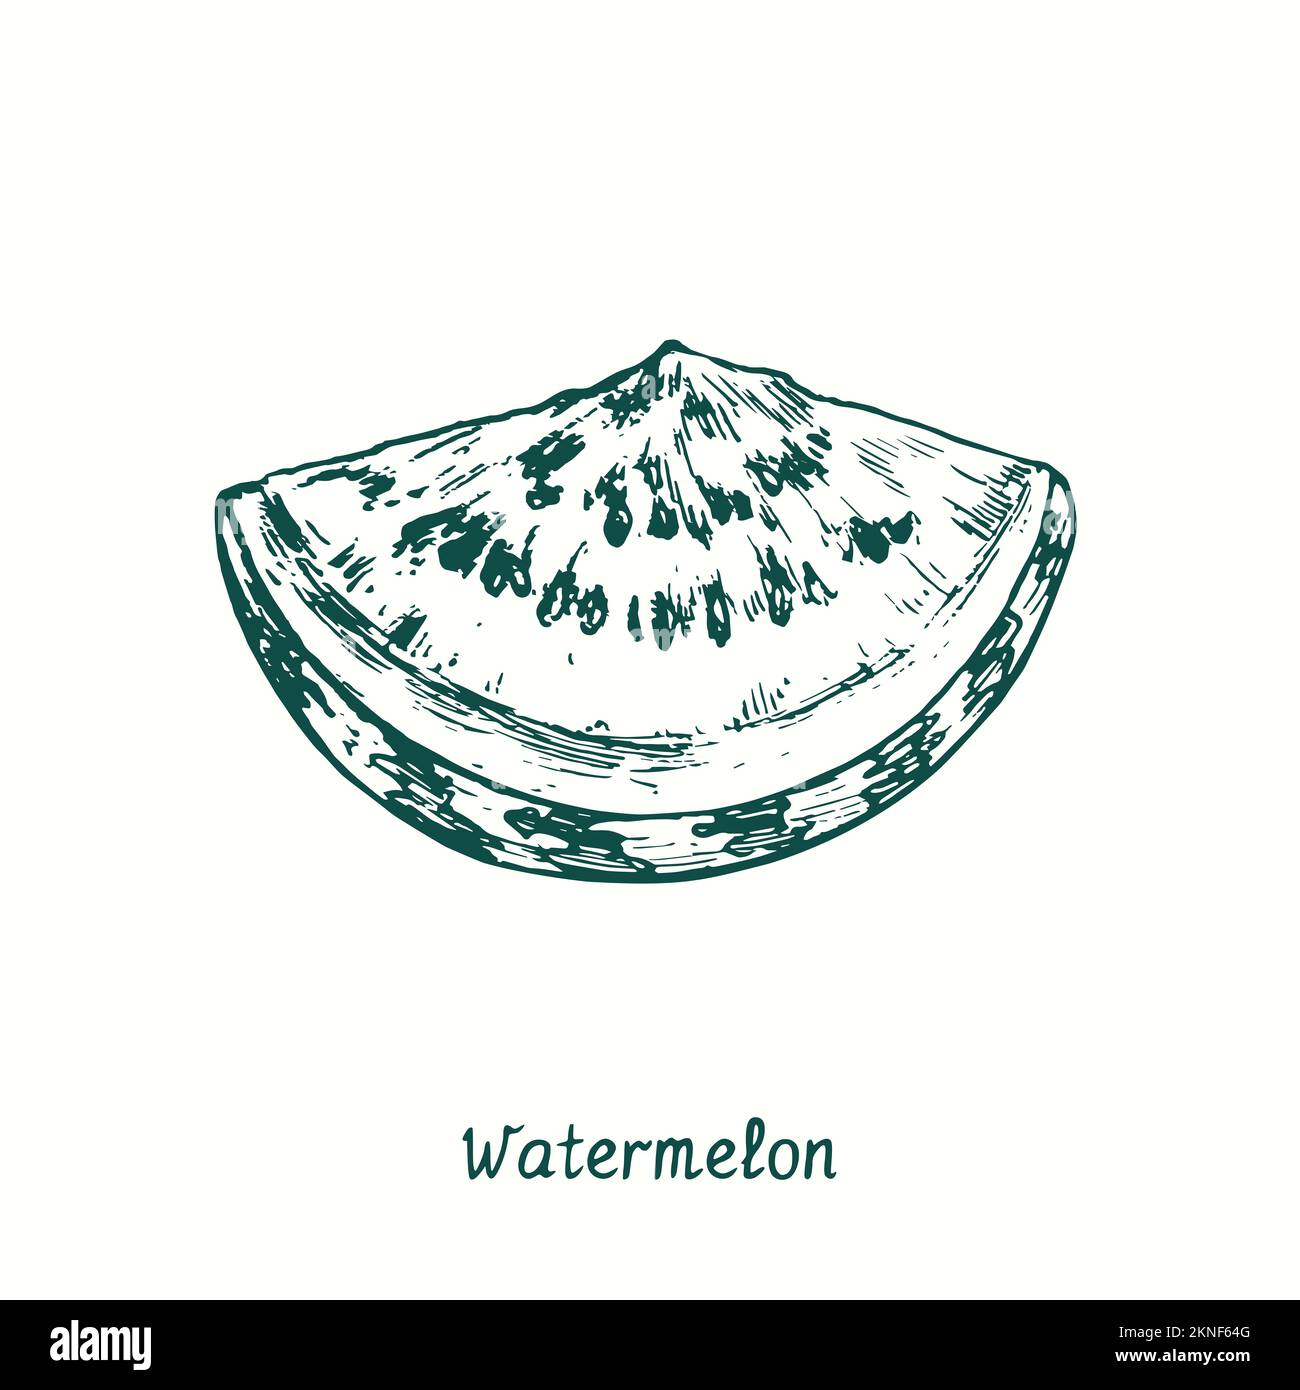 Watermelon (Citrullus lanatus) cut slice. Ink black and white doodle drawing in woodcut style Stock Photo